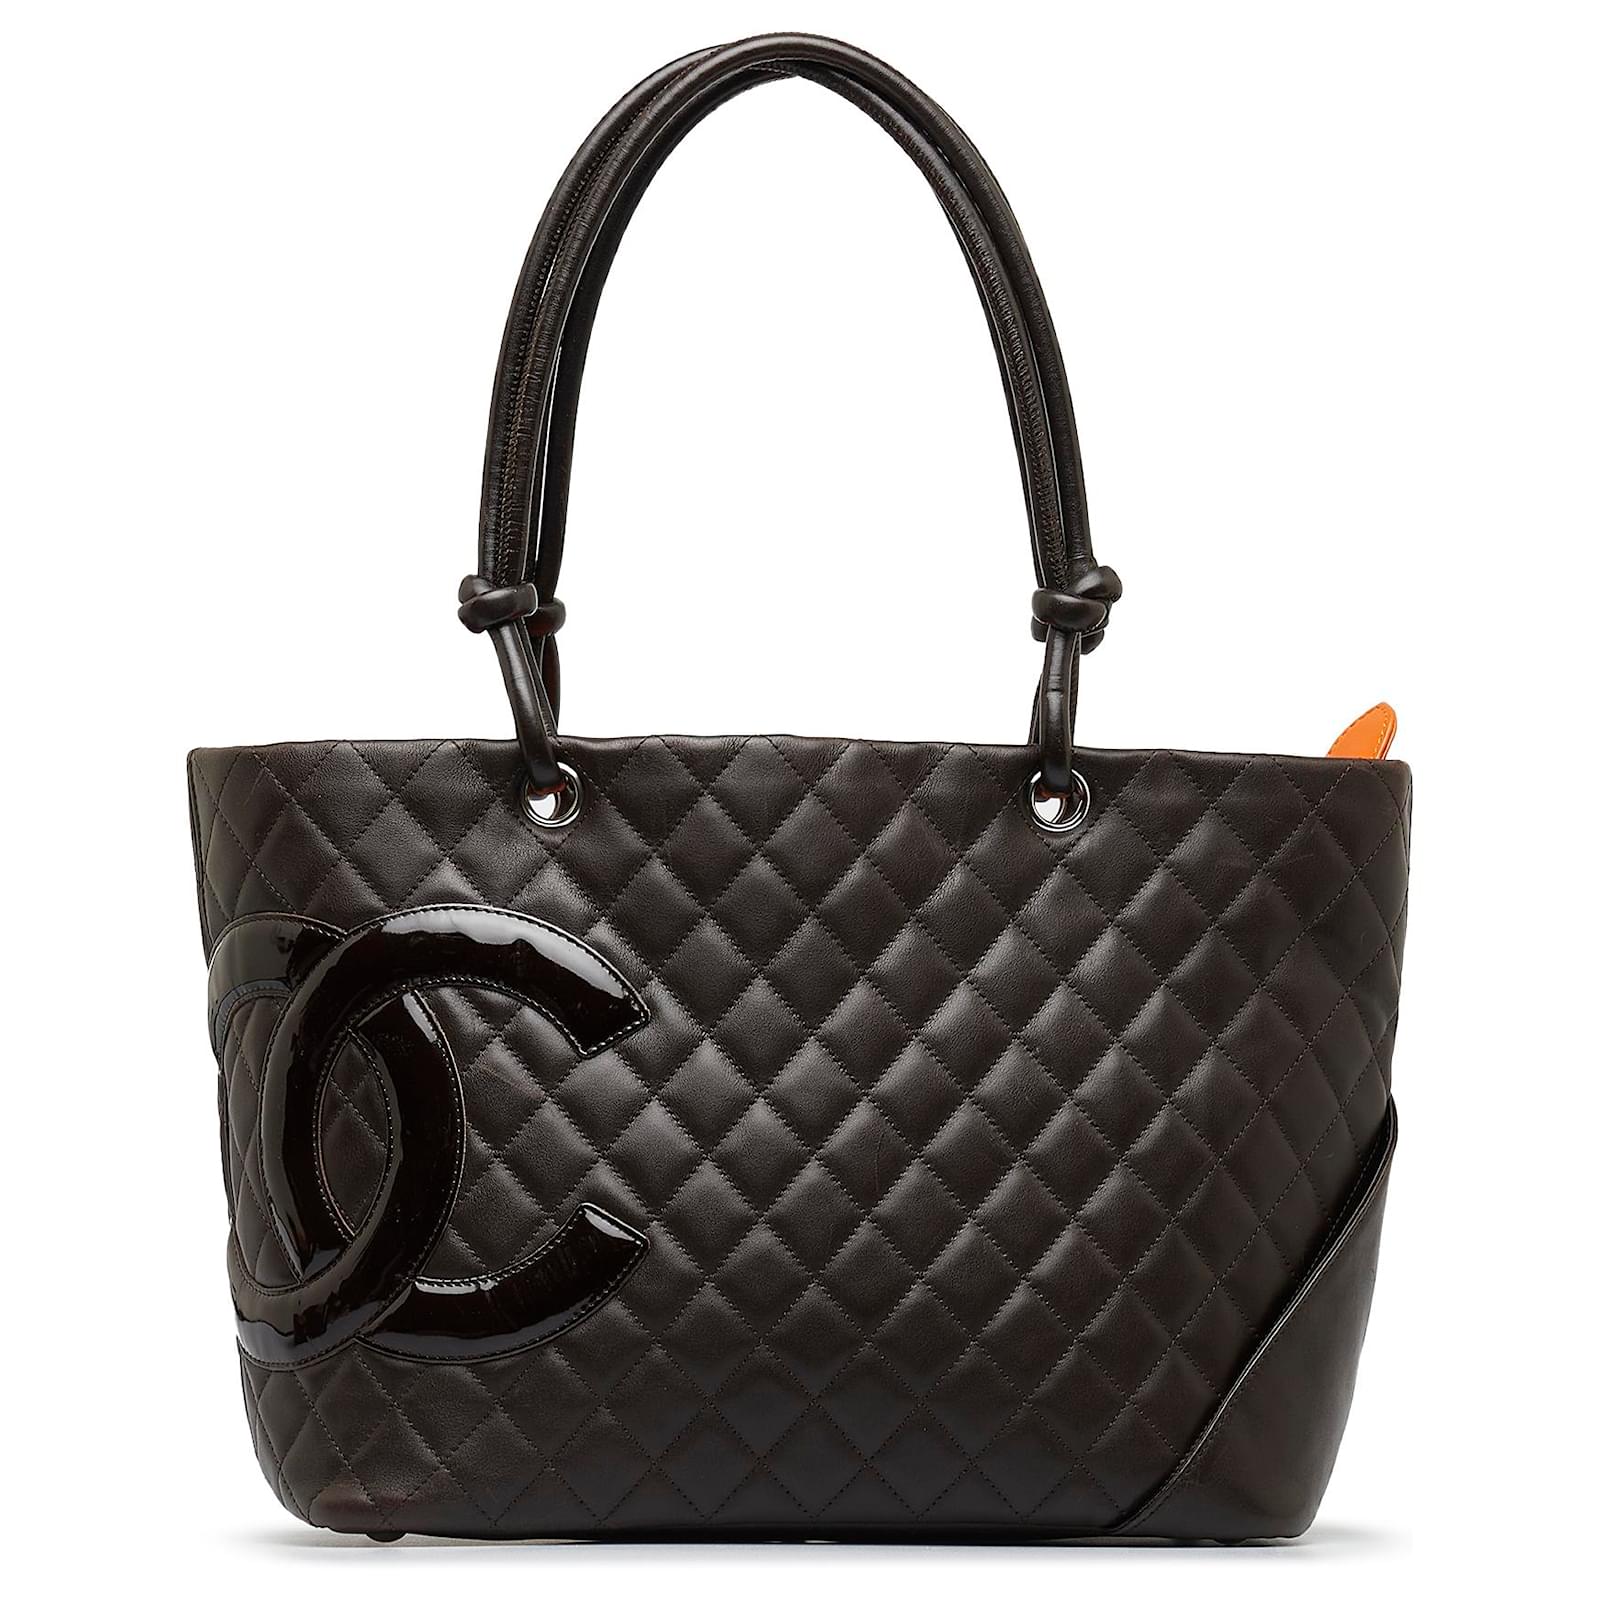 Chanel Beige/Black Quilted Leather Large Ligne Cambon Tote Bag